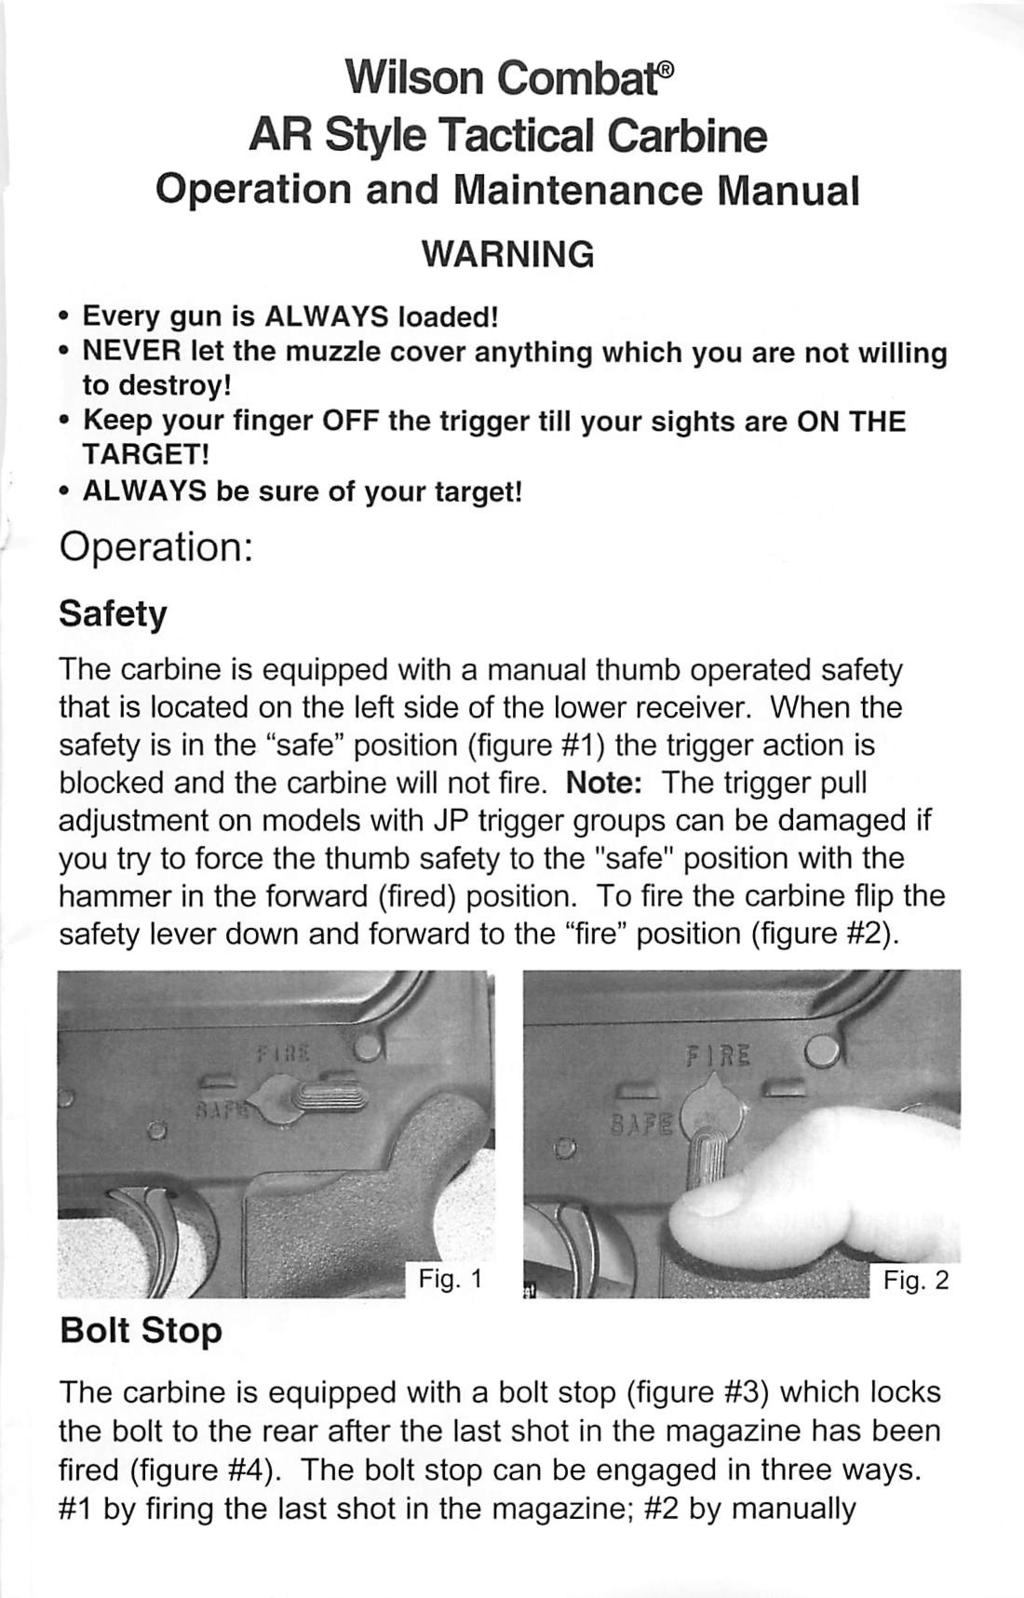 Wilson Combaf AR Style Tactical Carbine Operation and Maintenance Manual WARNING Every gun is ALWAYS loaded! NEVER let the muzzle cover anything which you are not willing to destroy!